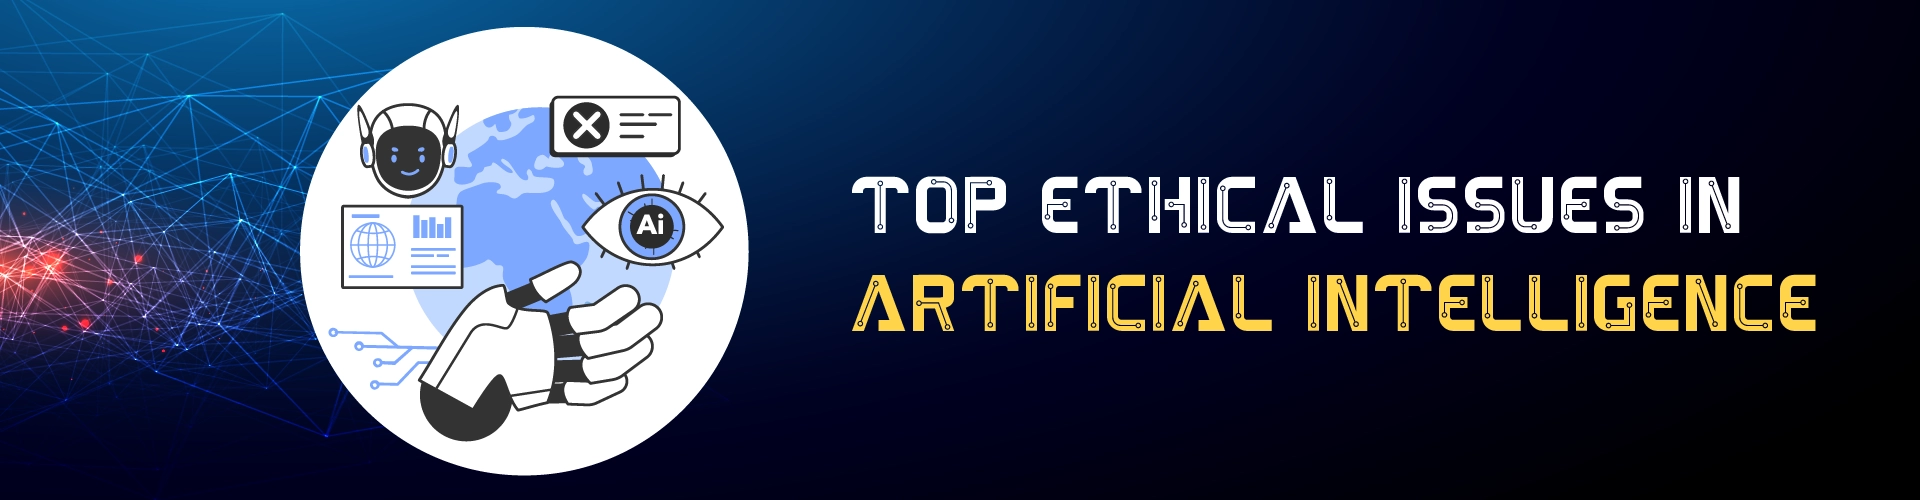 Top 5 Ethical Issues in Artificial Intelligence